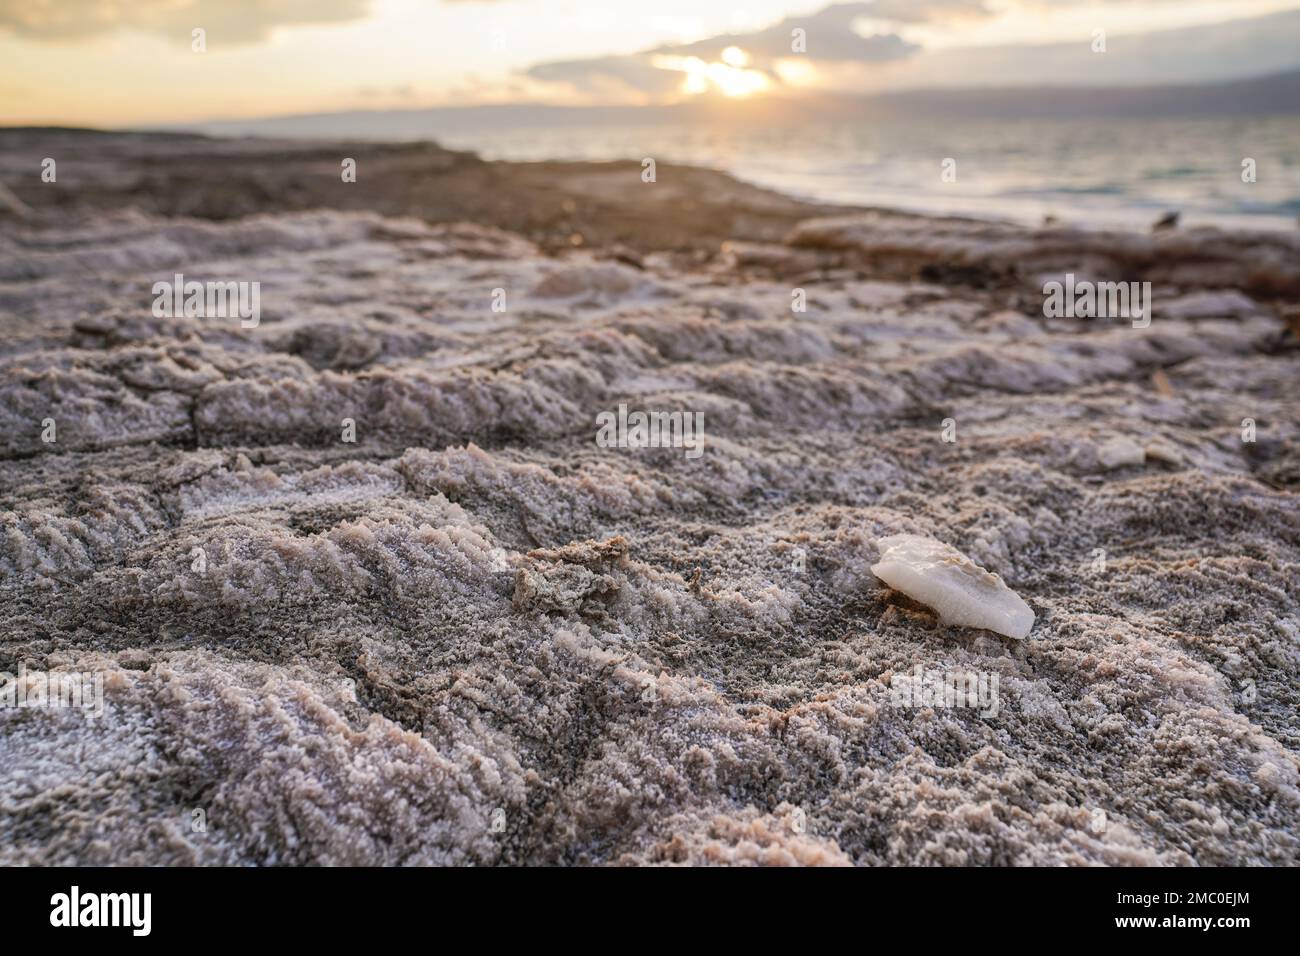 Sand and stones covered with crystalline salt on shore of Dead Sea, clear water background Stock Photo